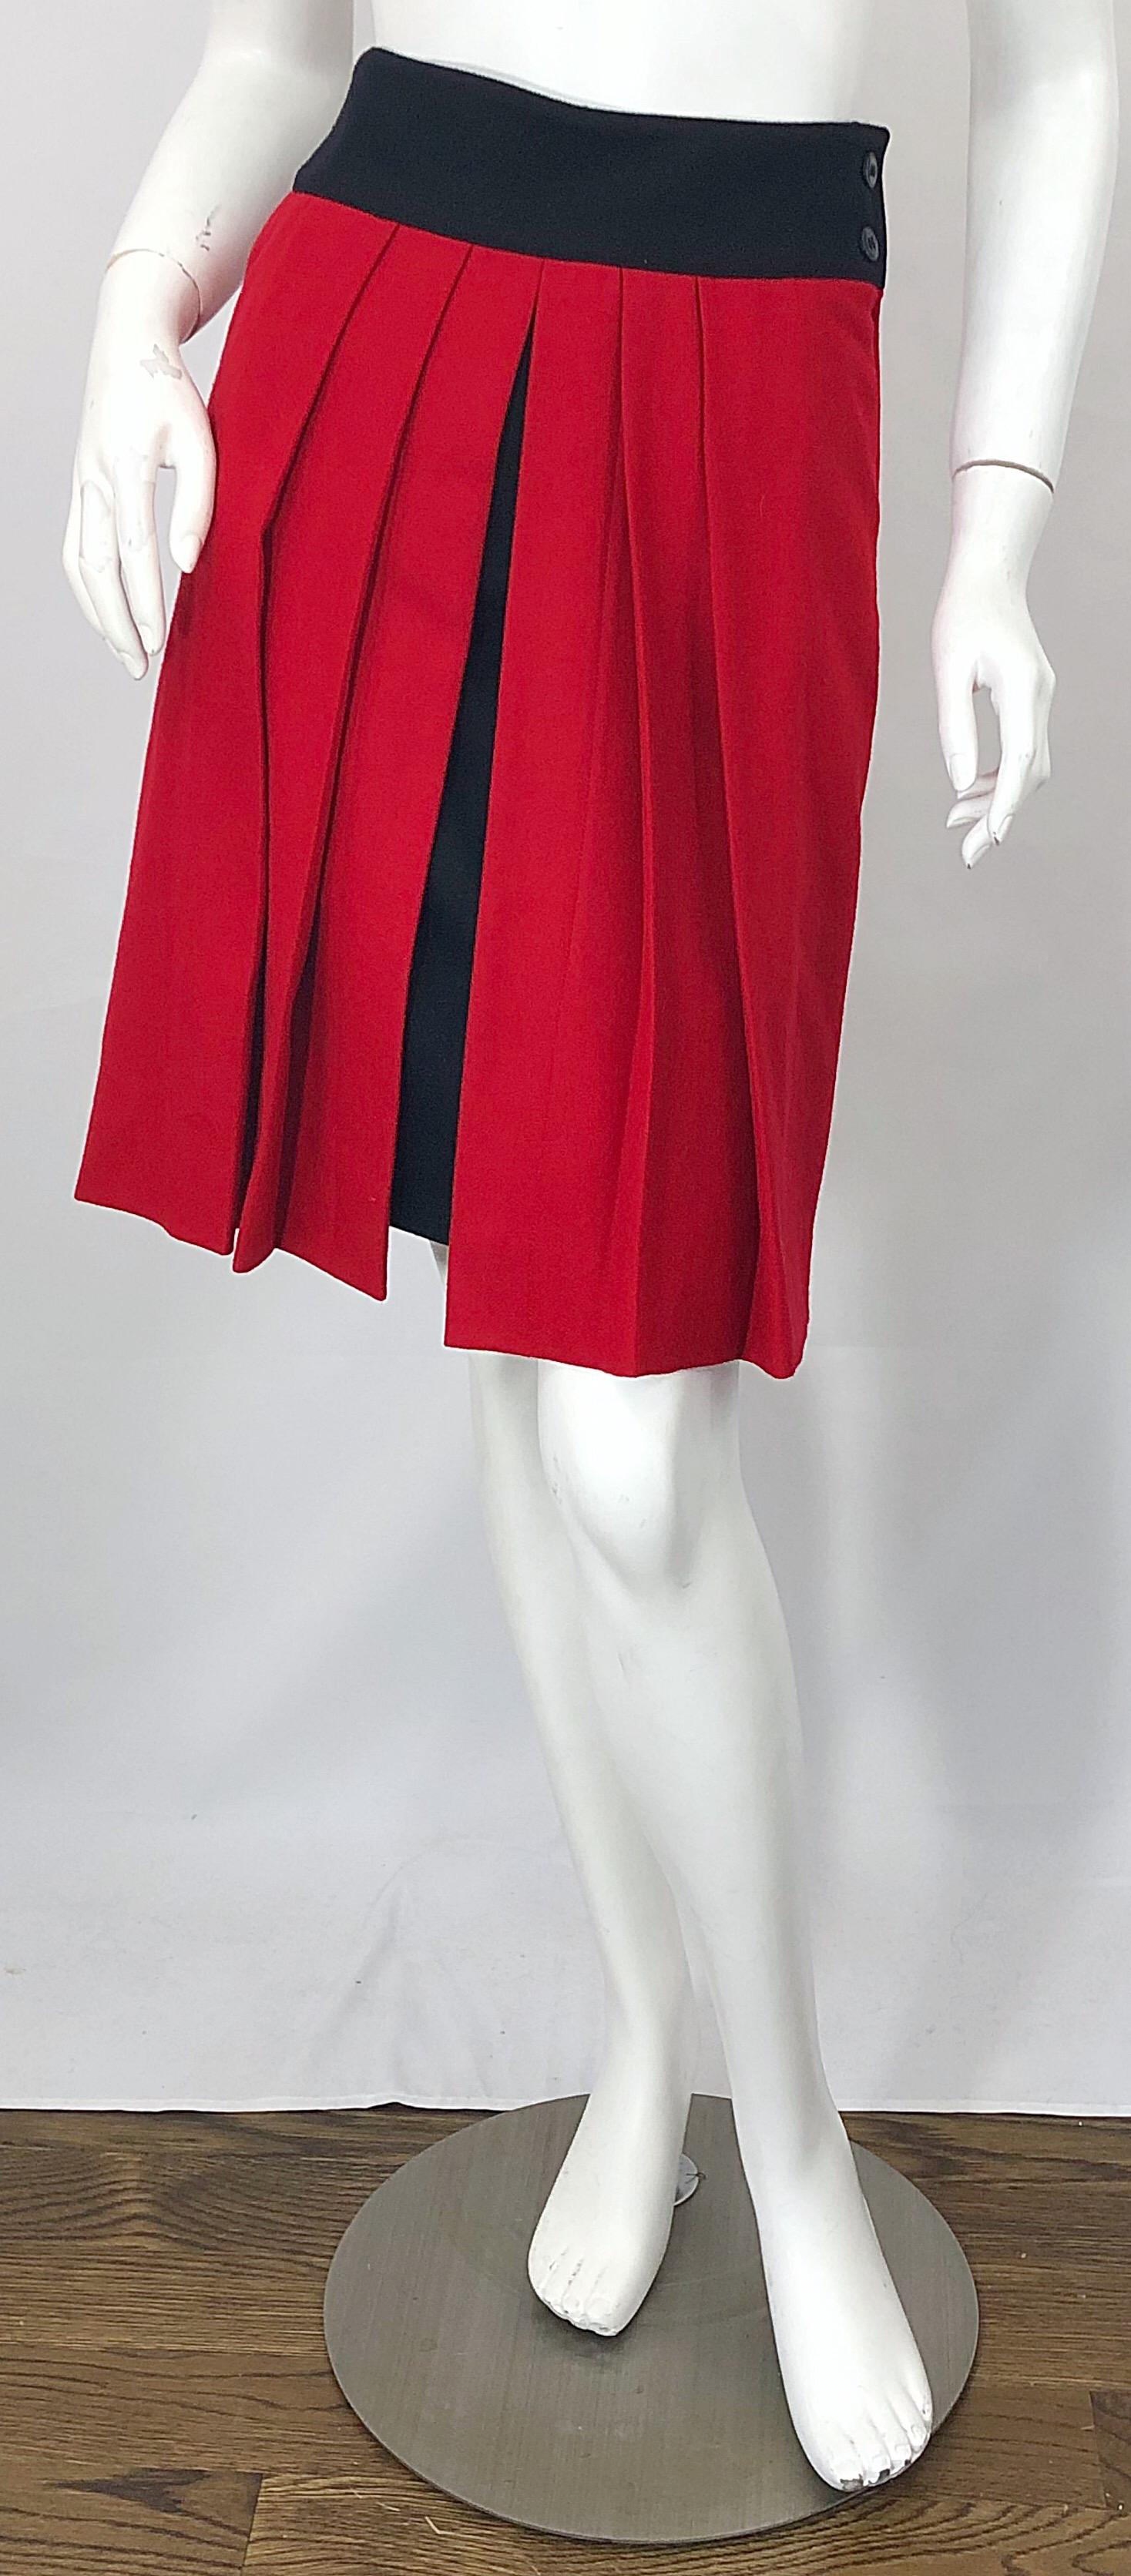 Gianni Versace for Genny Lipstick Red + Black 1980s Vintage 80s Pencil Skirt  For Sale 2